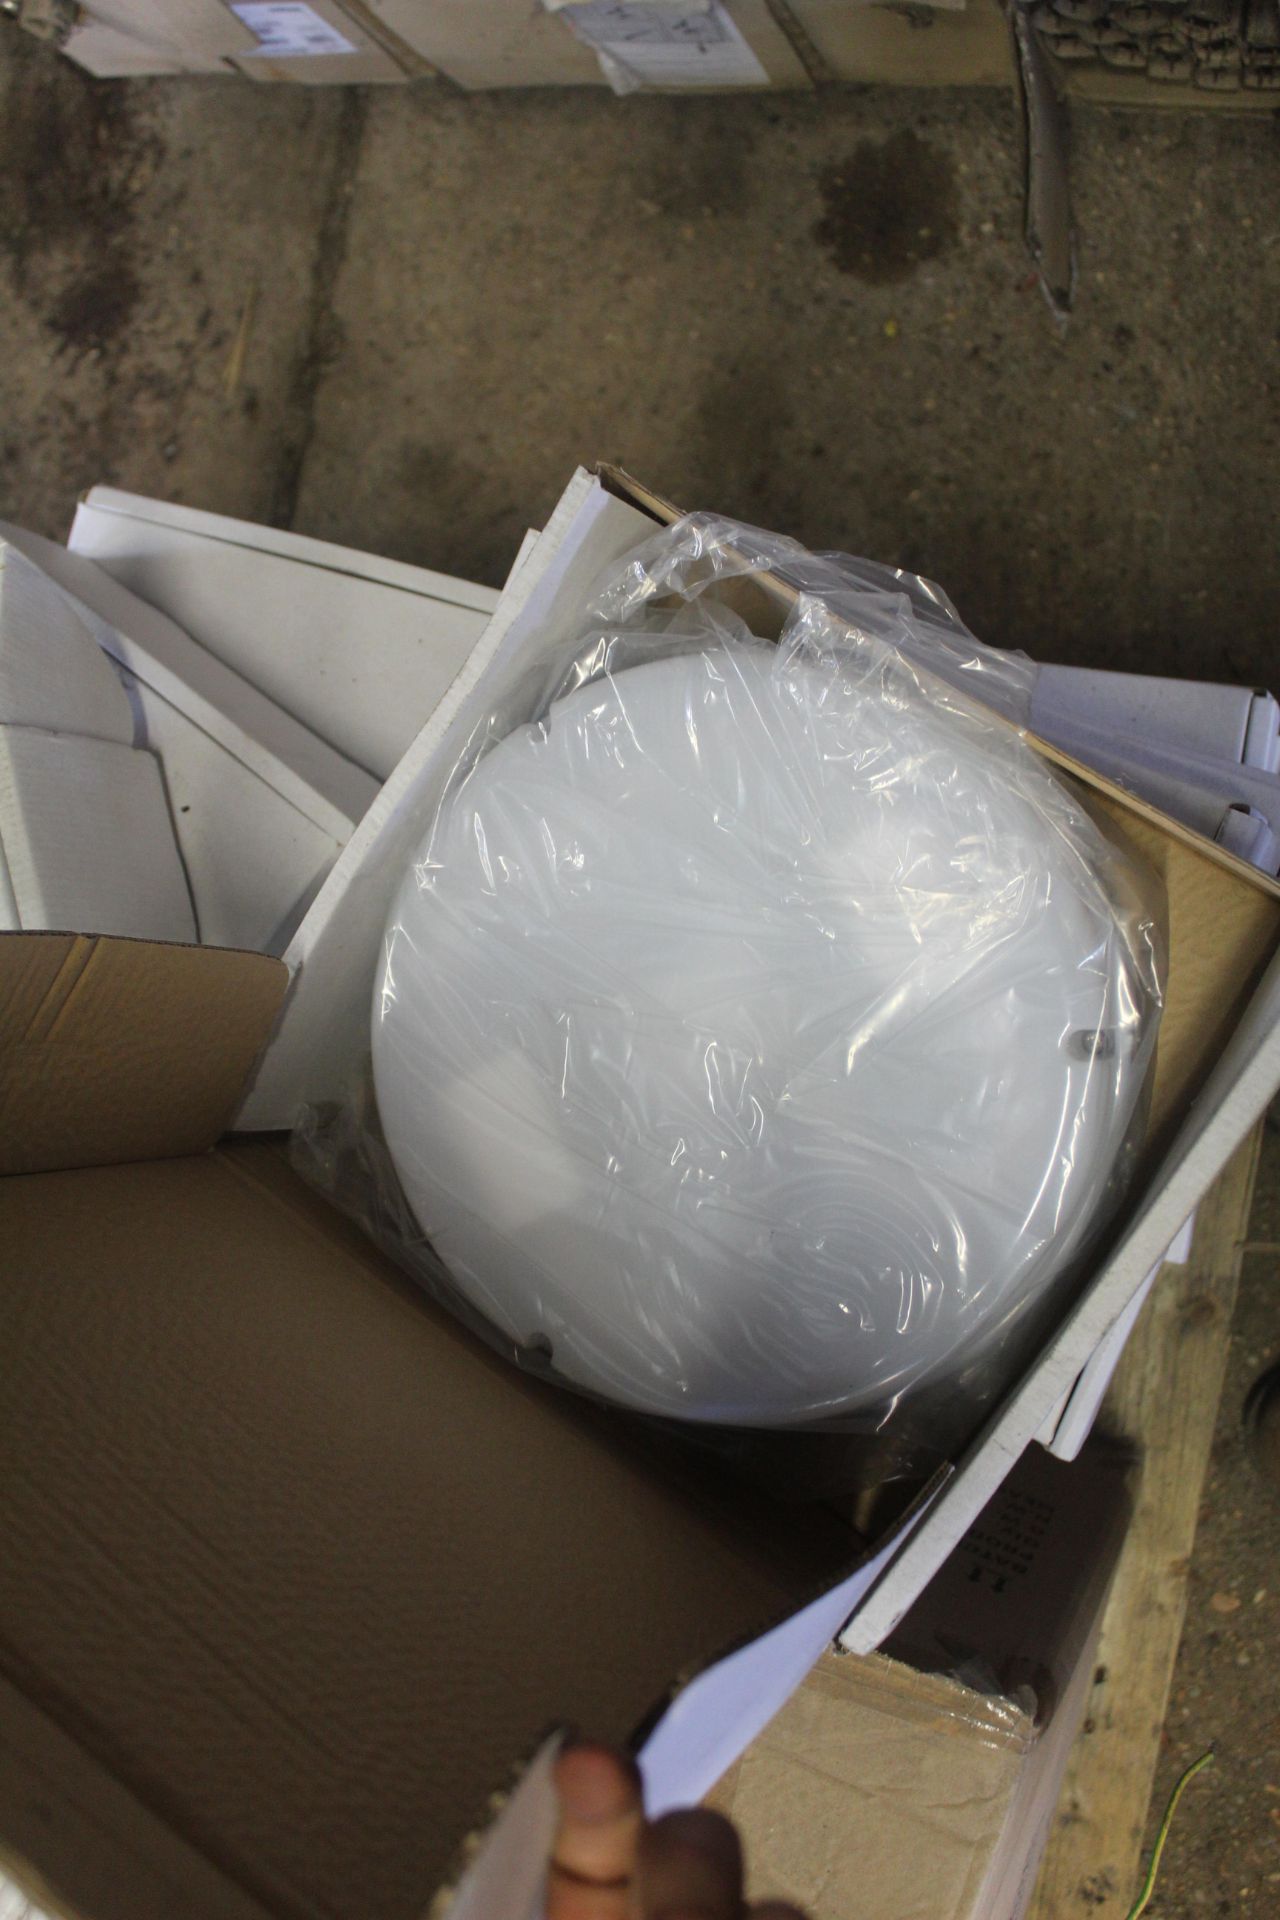 Large quantity of light fittings, junction boxes, - Image 5 of 5